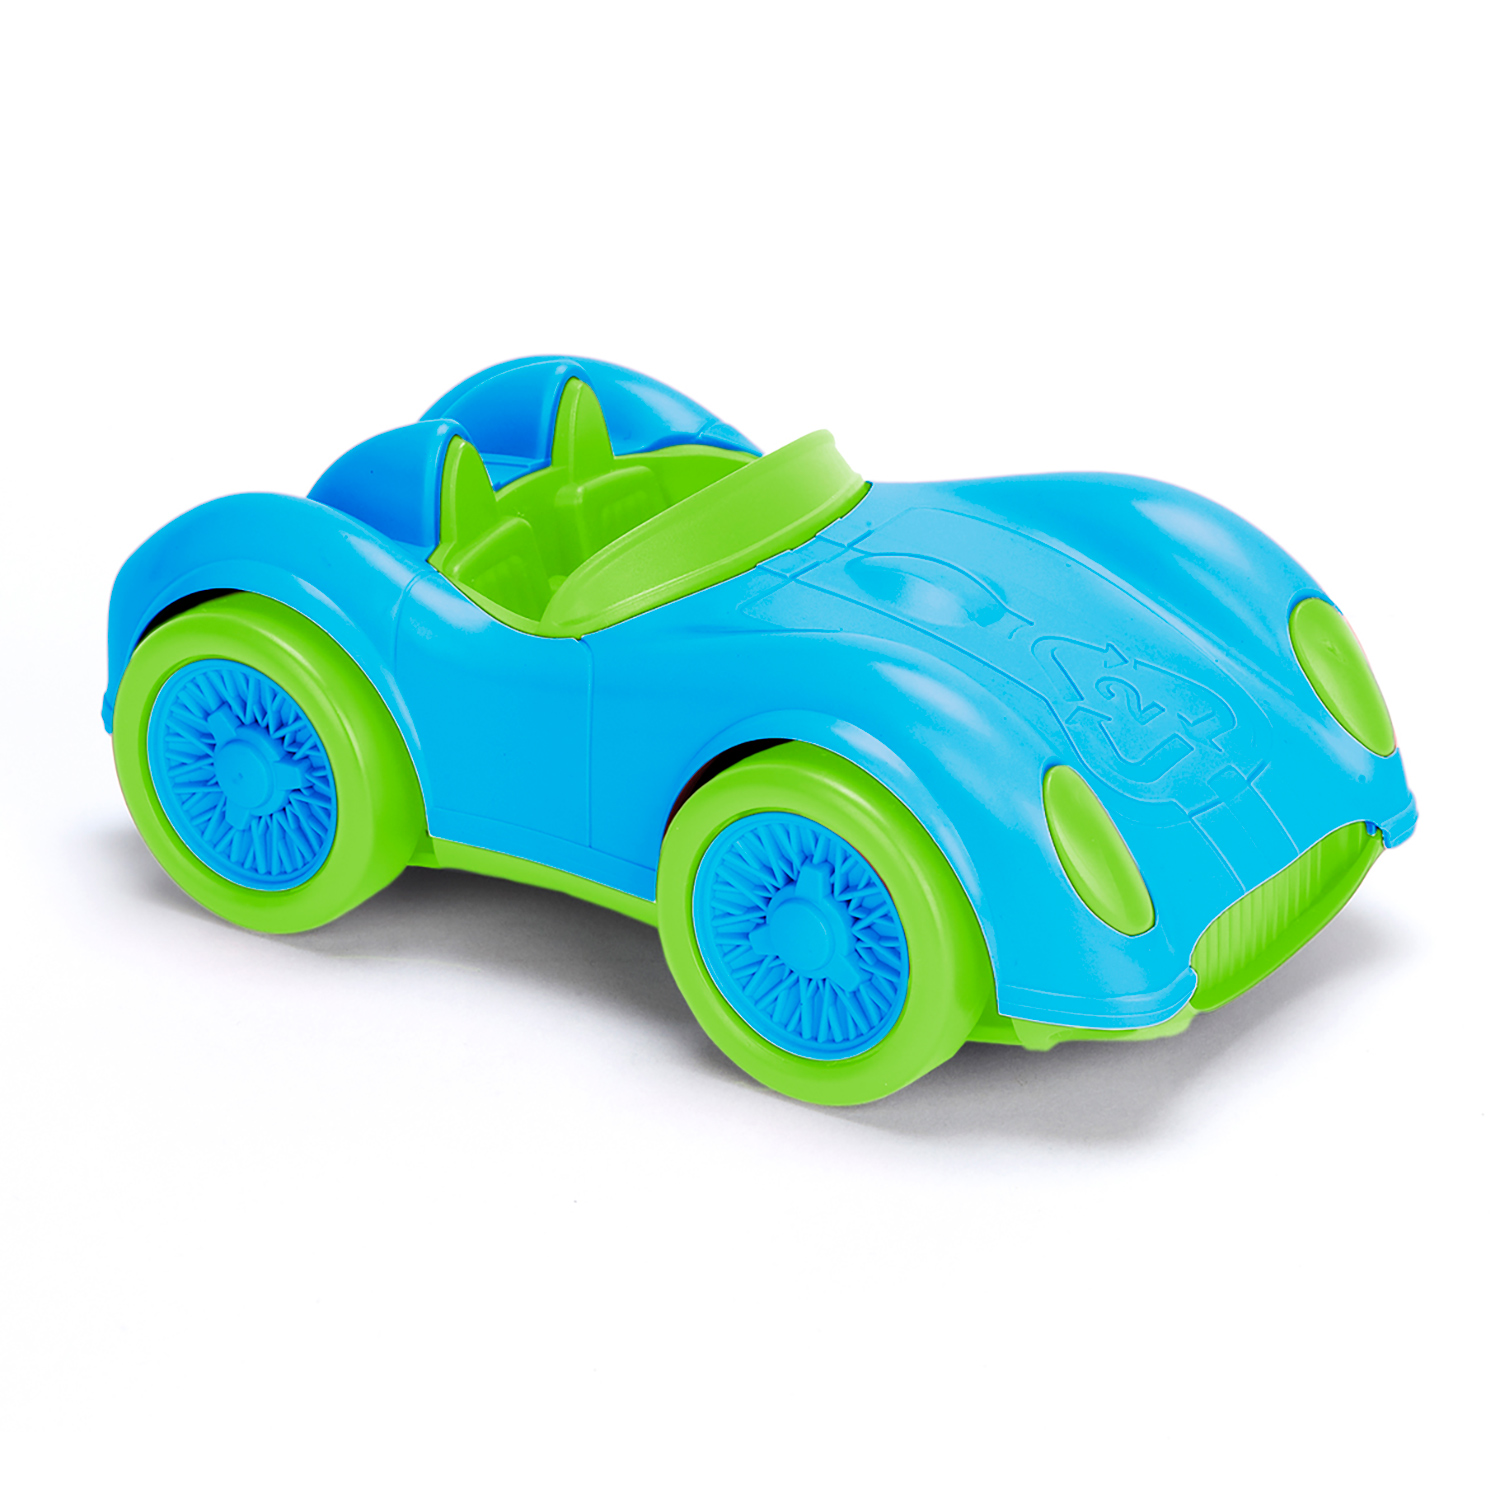 PBS KIDS Race Car - Blue and Green